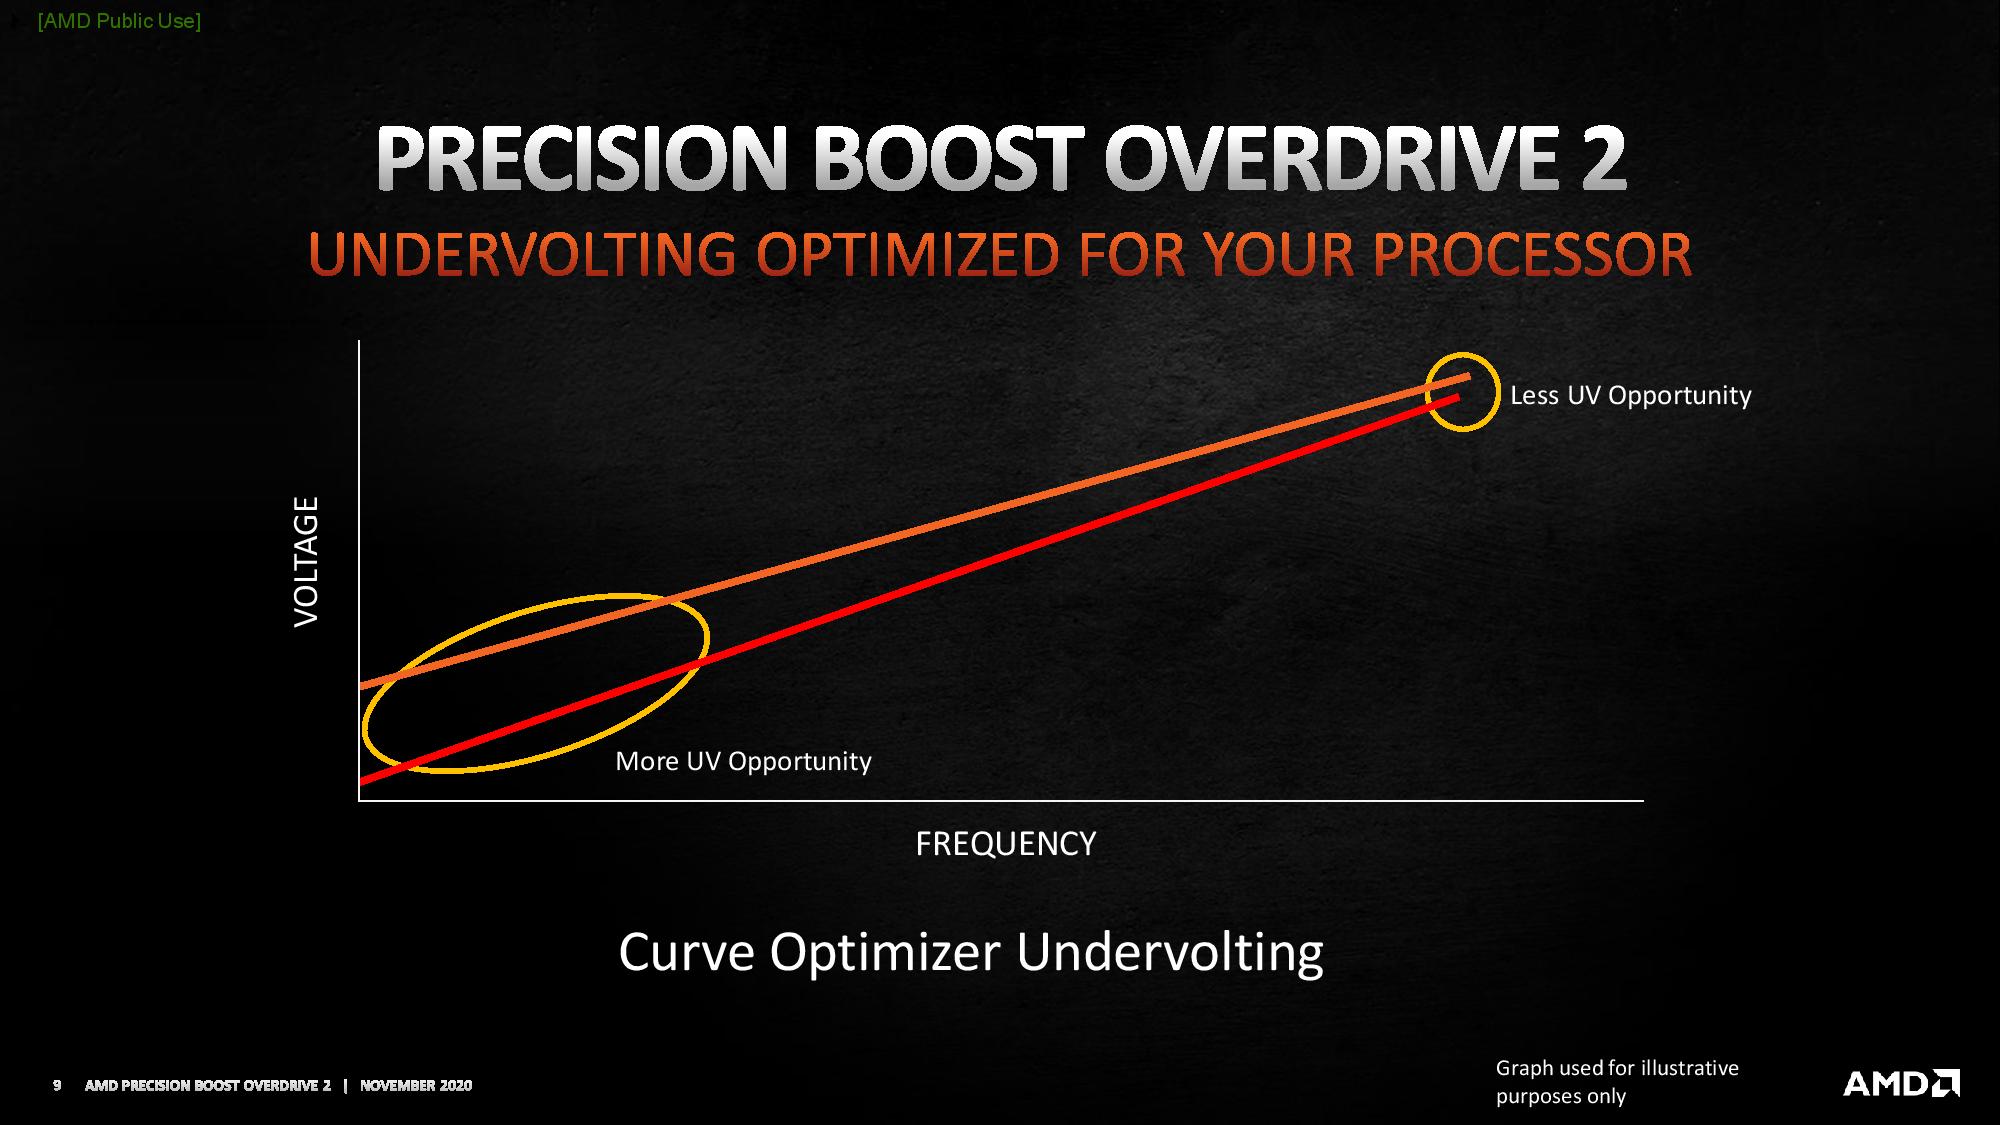 AMD Precision Boost Overdrive 2: Adaptive Undervolting For Ryzen 5000 Coming Soon